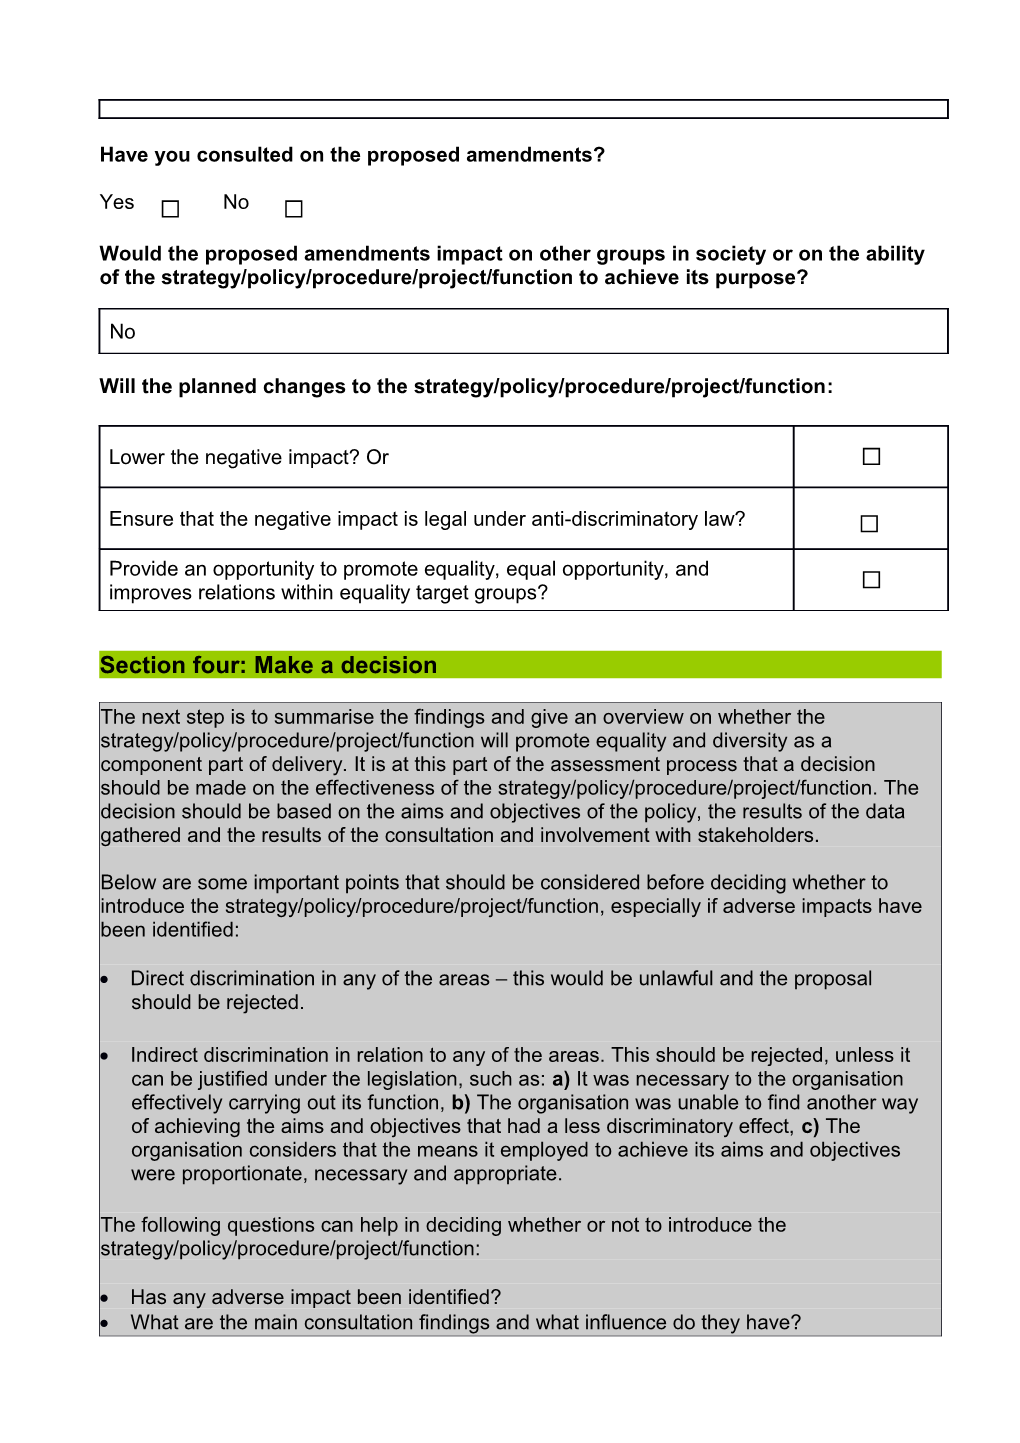 Equality Impact Assessment Form (Part 2)